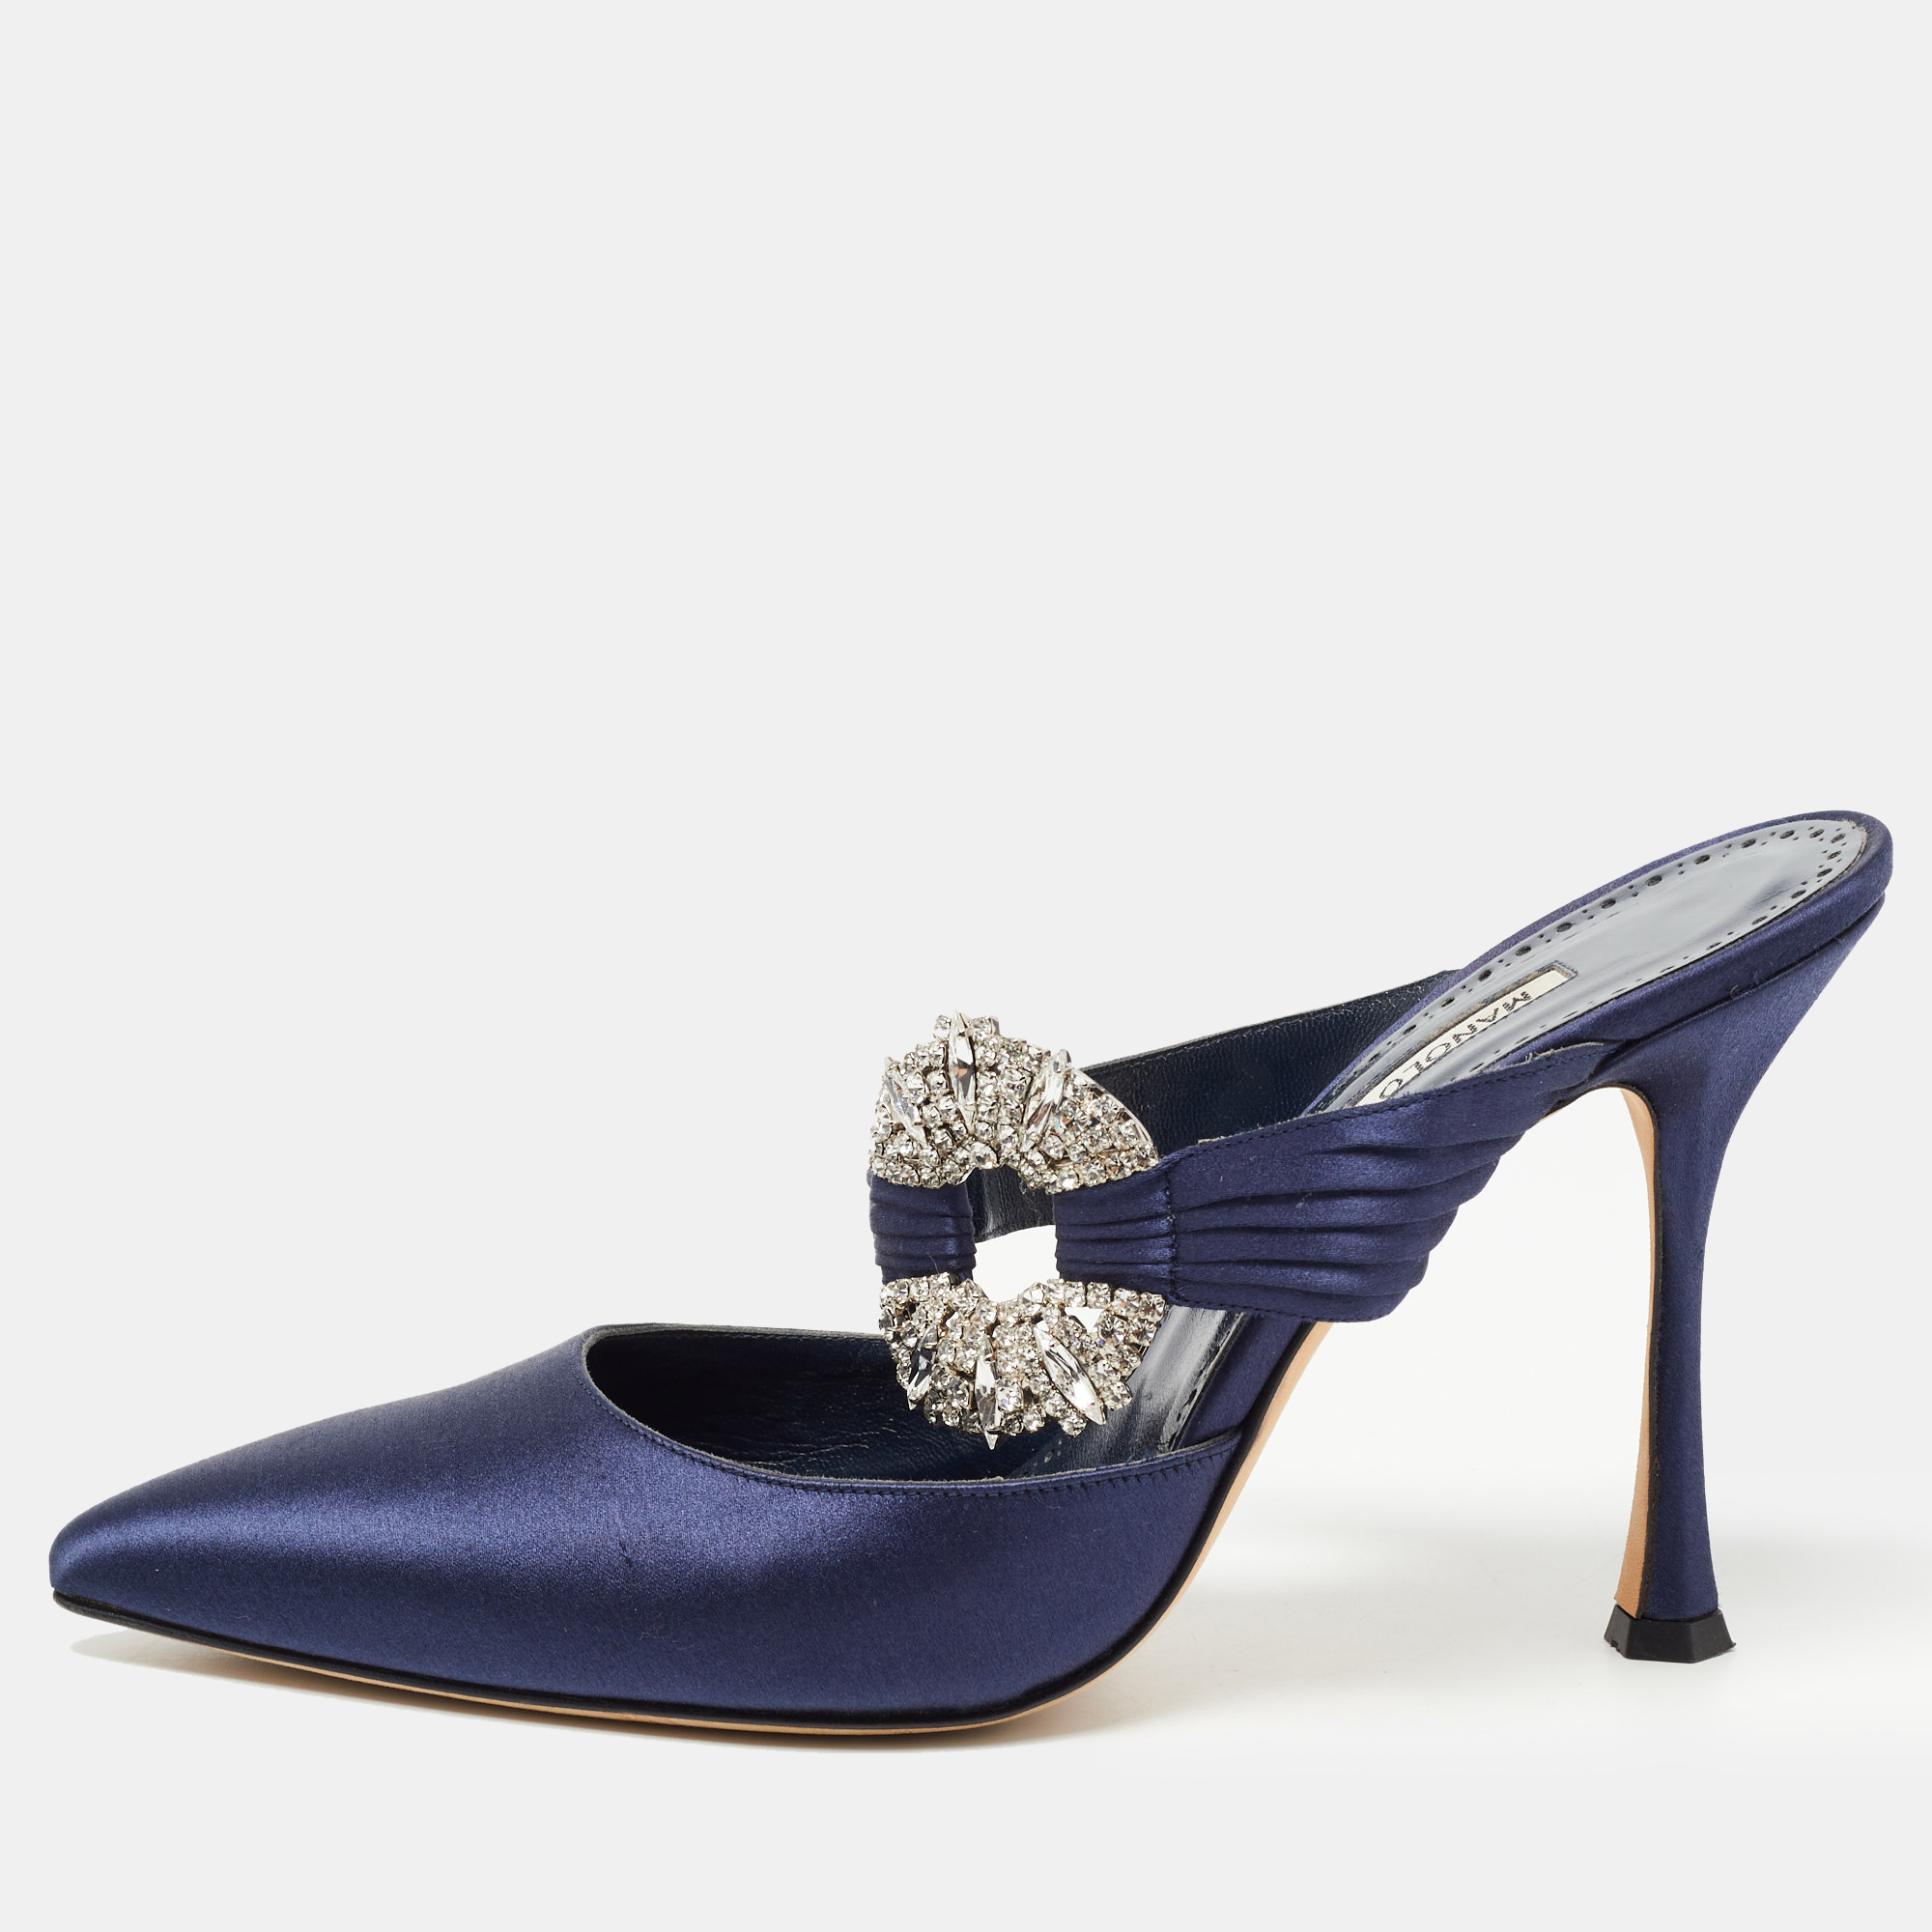 Pre-owned Manolo Blahnik Navy Blue Satin Crystal Embellished Pointed Toe Mules Size 39